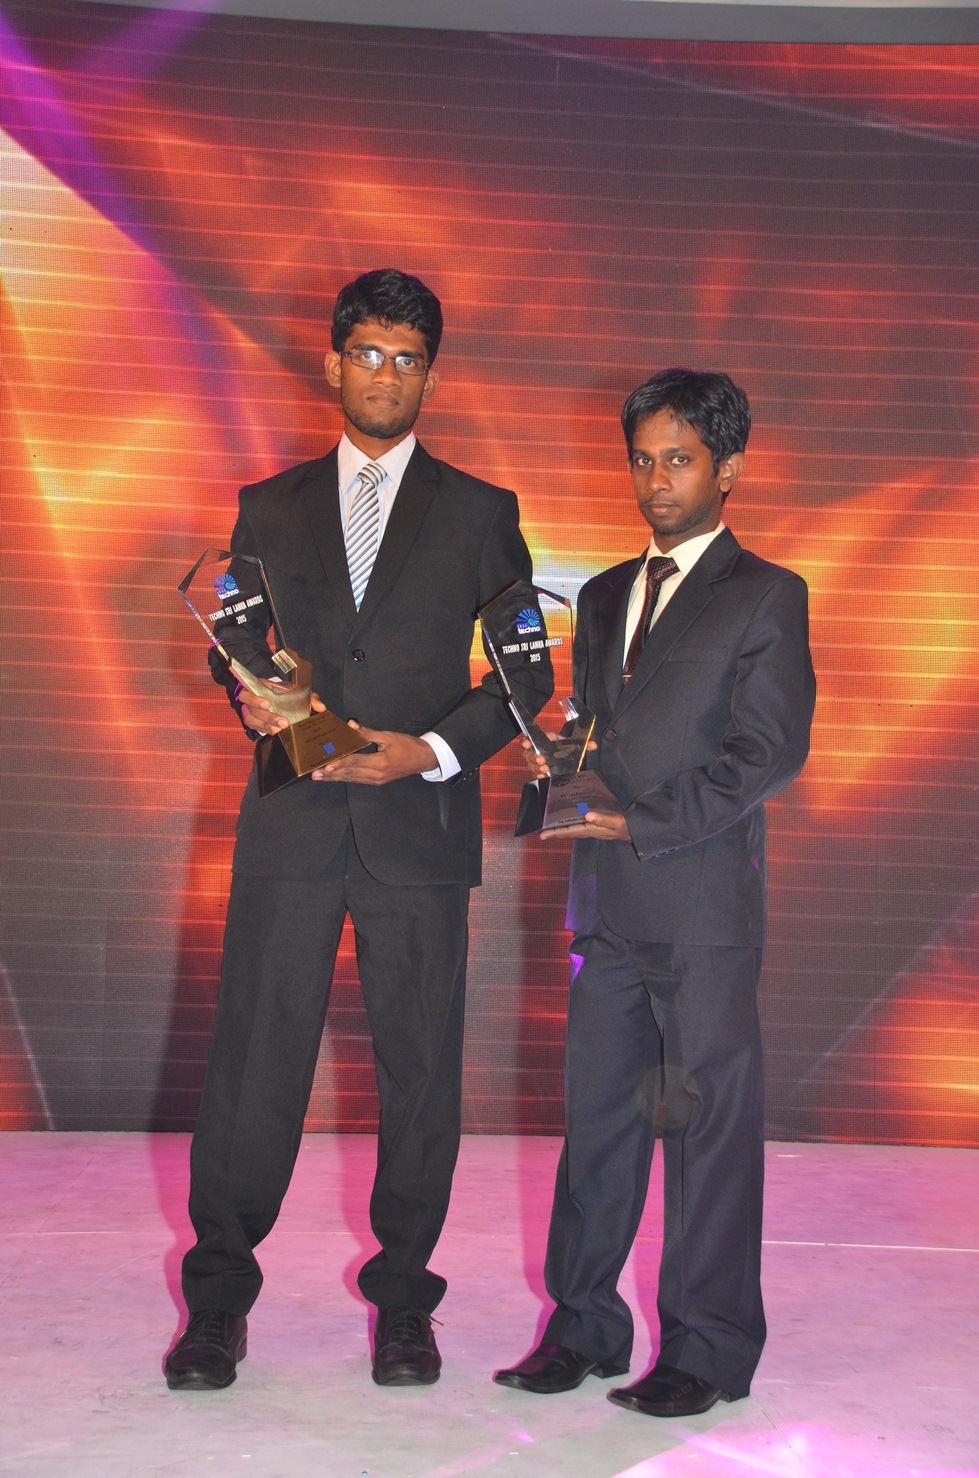 Photo: Anuruddha (left) and Thilina (right) with the Gold and Silver Awards